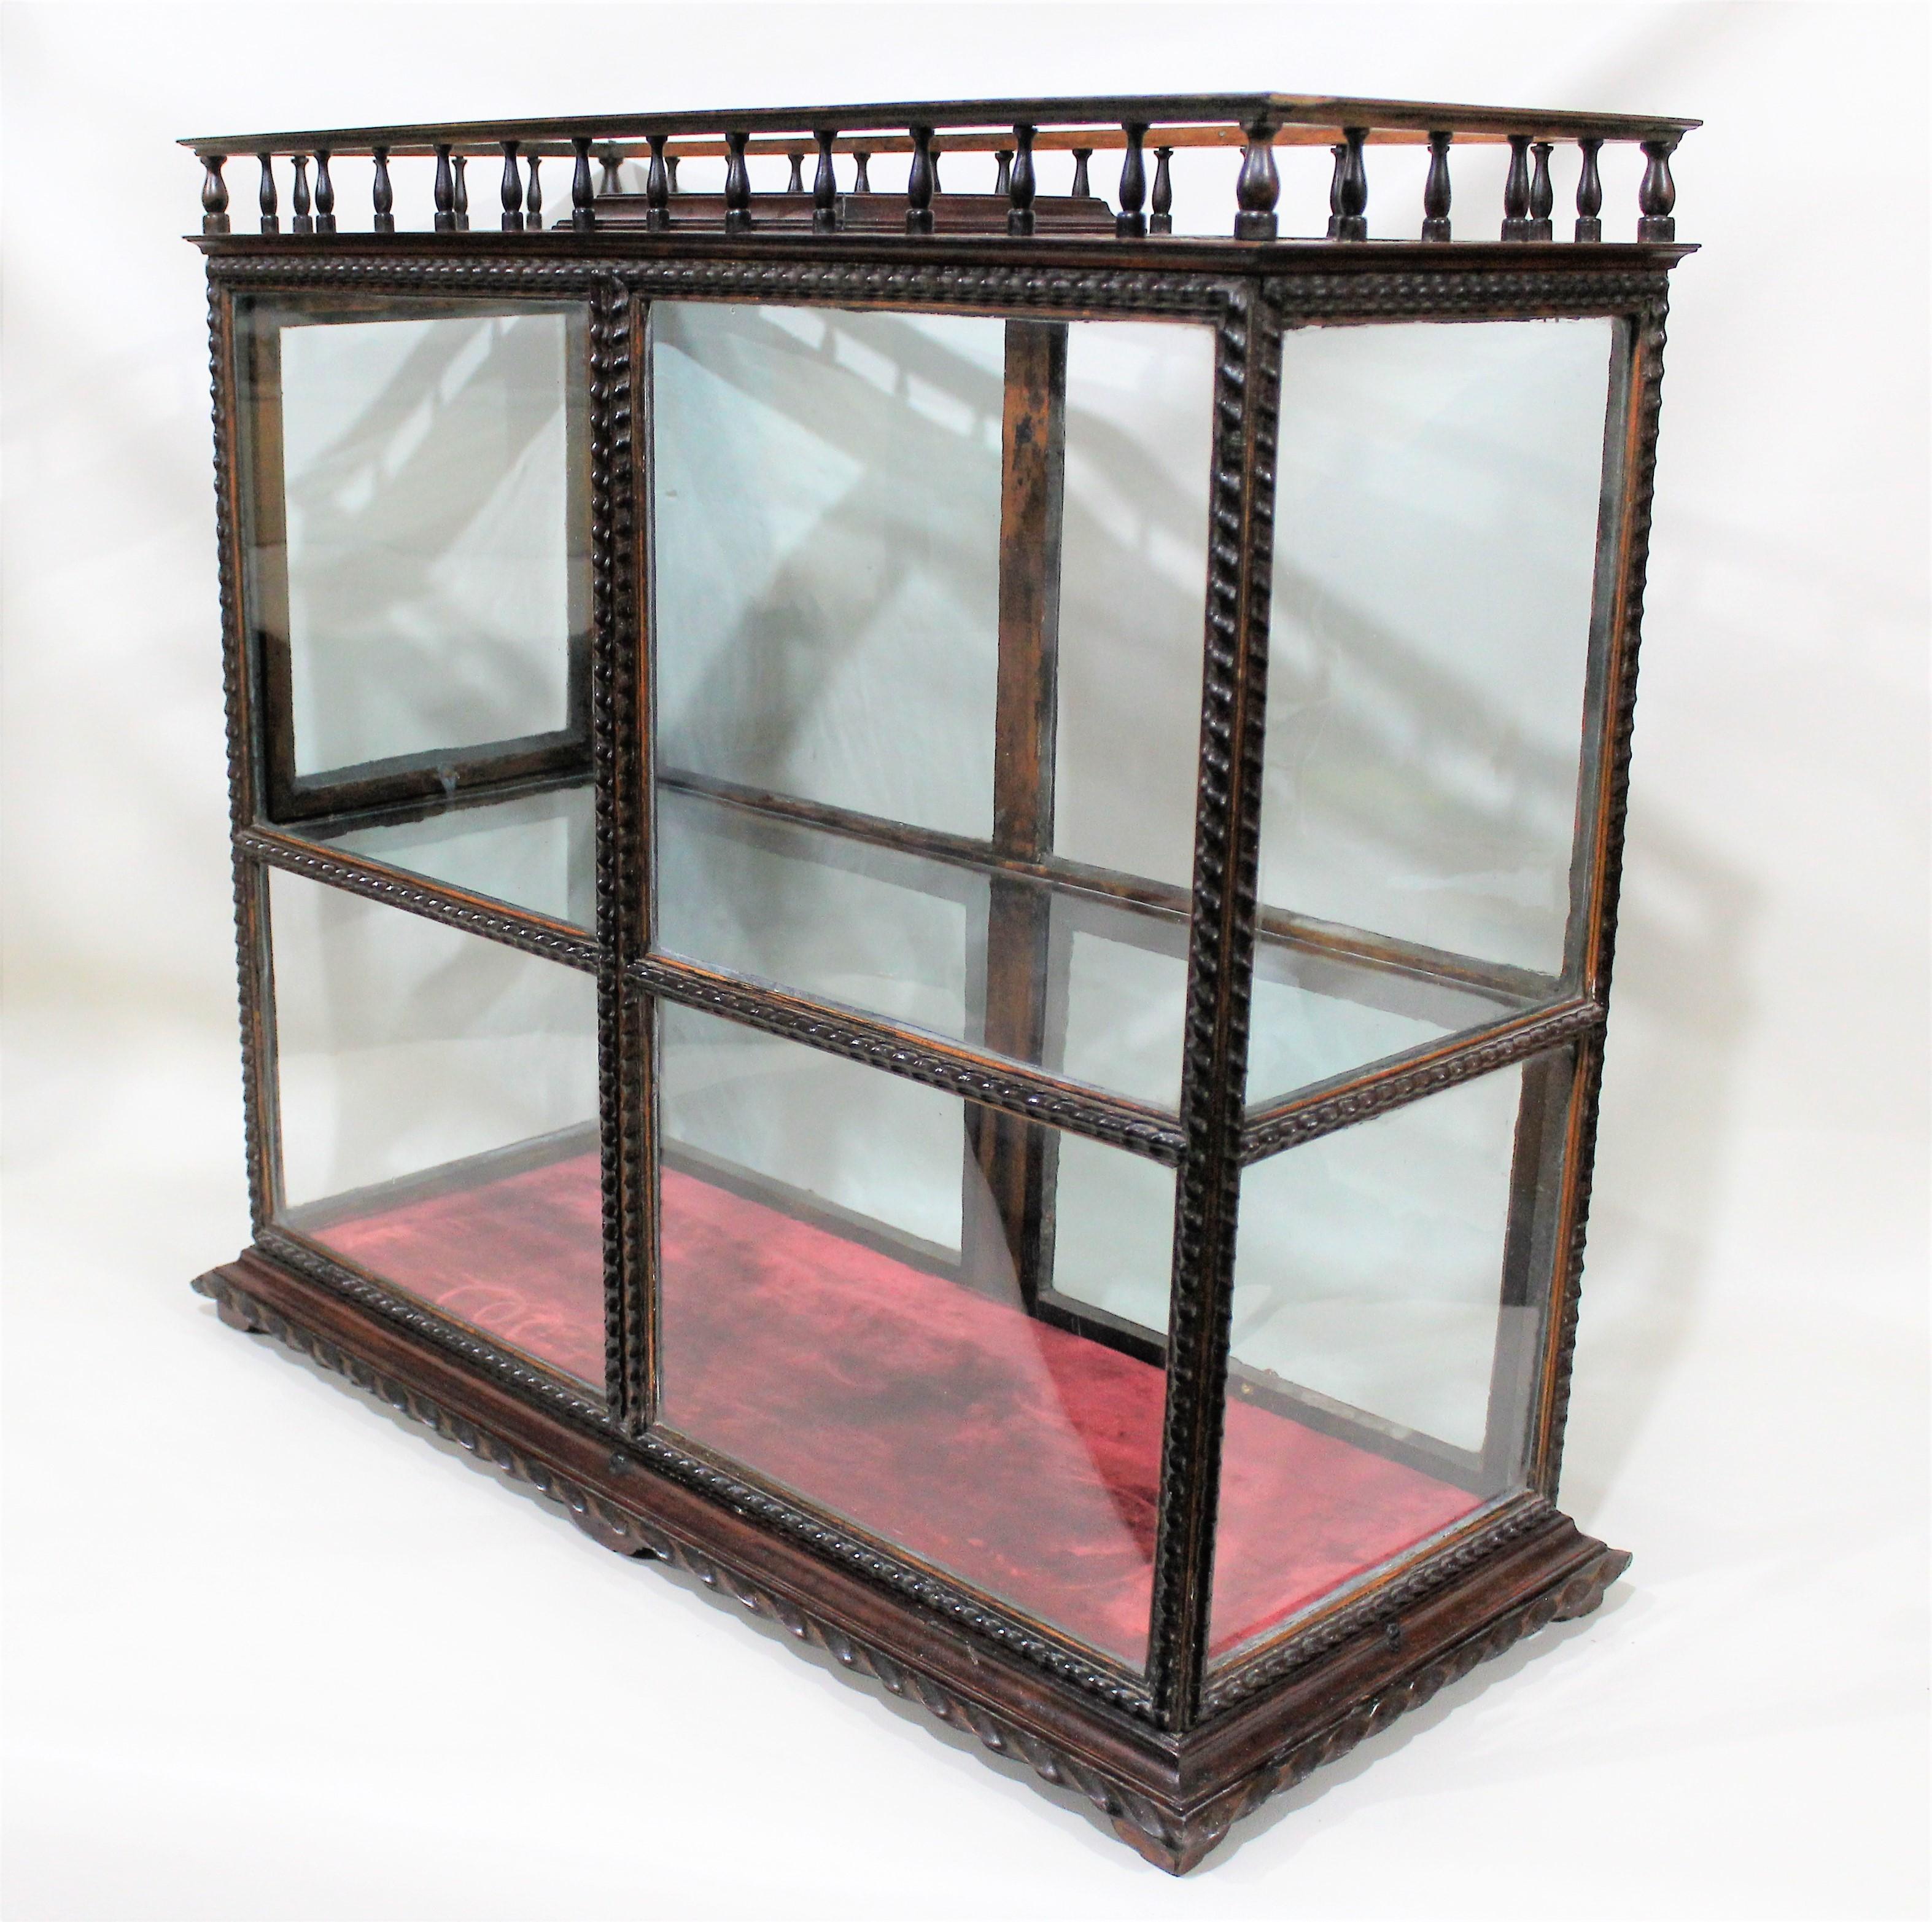 Georgian tabletop display cabinet with period glass and carved wood frame and gallery.